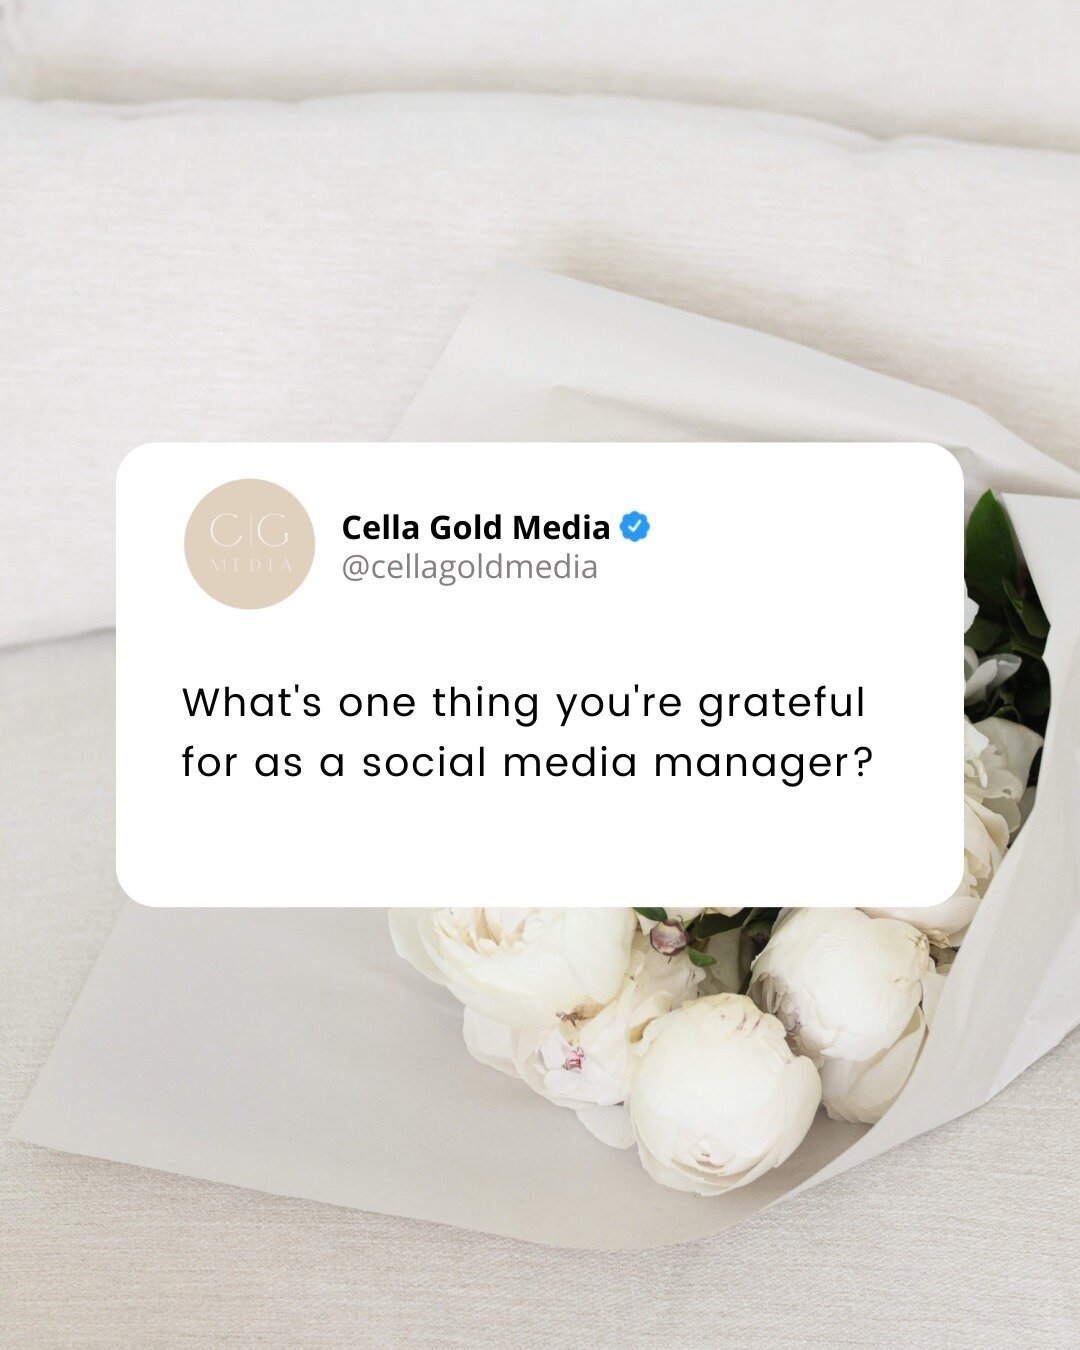 Calling all social media managers: Let's spread the love &amp; gratitude today 🤍 ⁠
⁠
What's one thing you're grateful for as a social media manager? We'll go first: We're grateful for our incredible team and amazing clients, who always make work fee